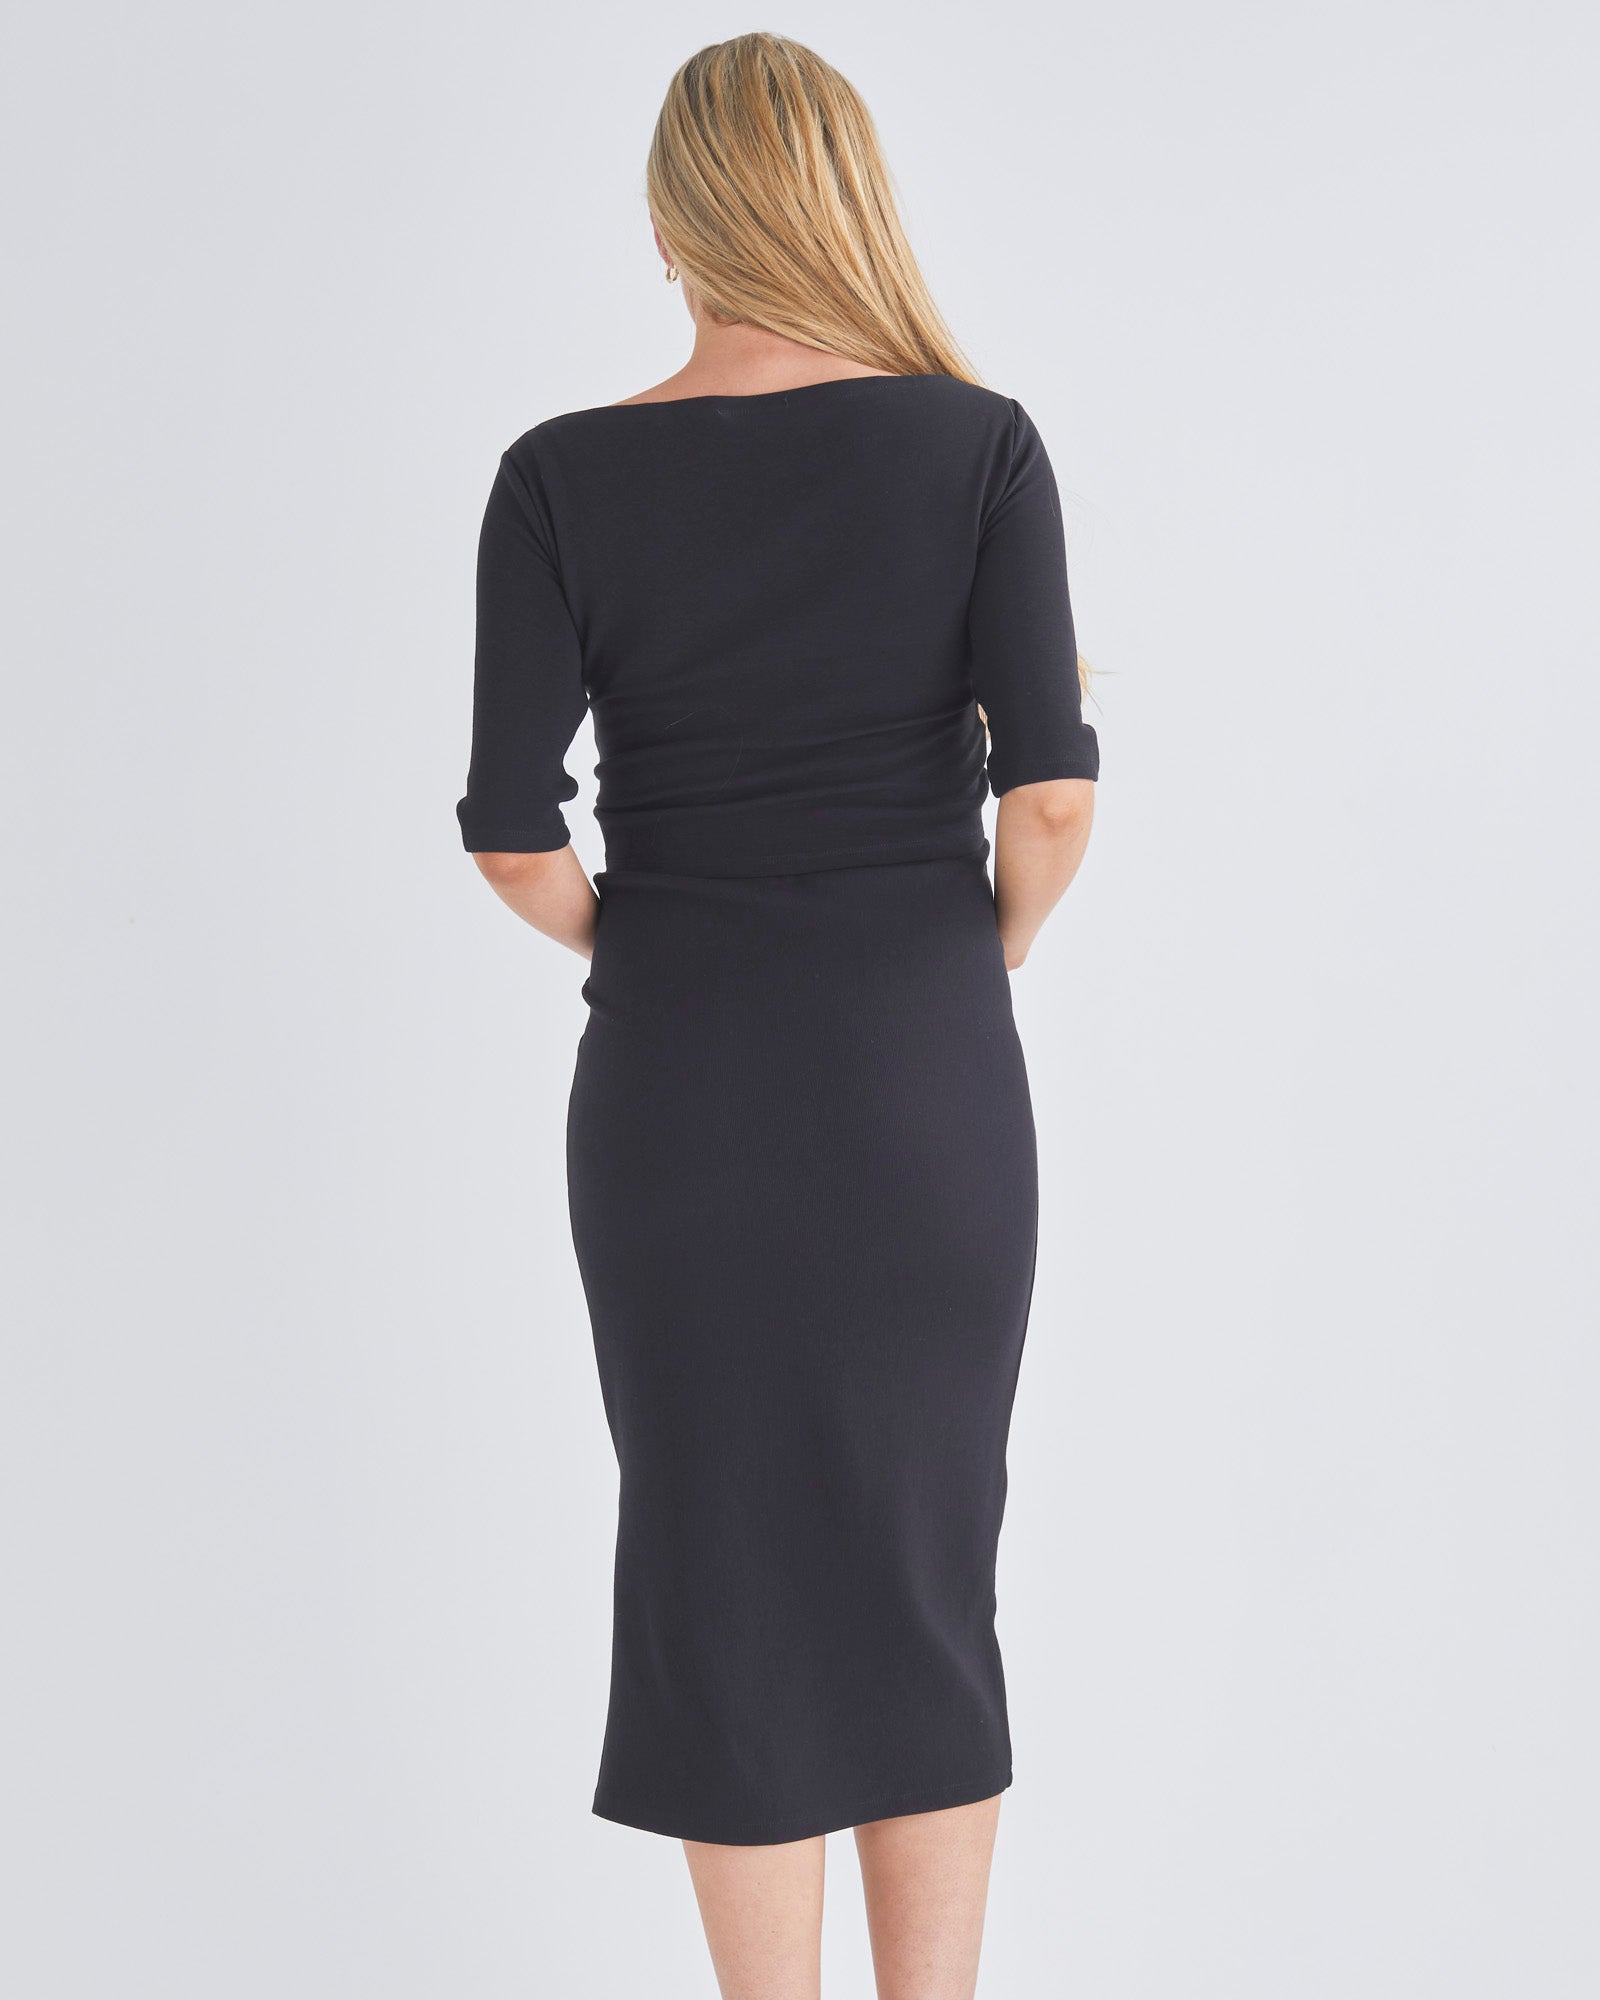 Back View - A Pregnannt Woman Wearing Athena Maternity Work/Day Smart Casual Black Outfit Set - a Pencil Midi Skirt & a Cross Over Short Top from Angel Maternity Australia.